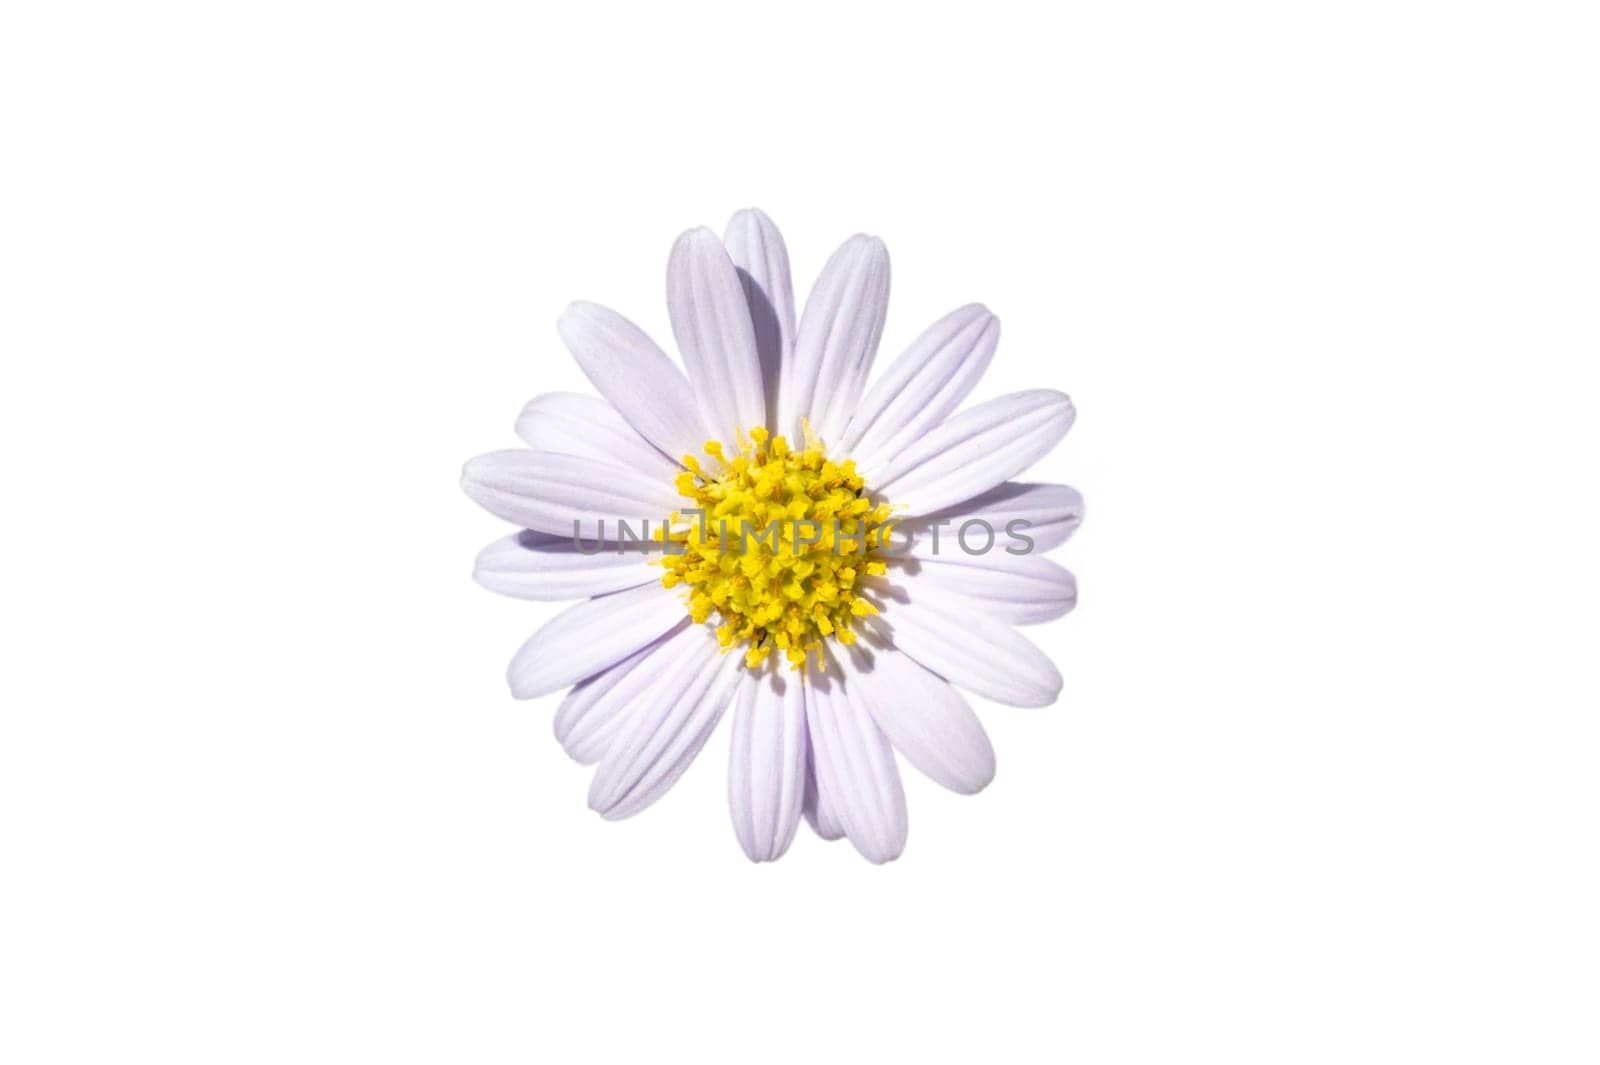 White daisy flower on a white background. Isolate